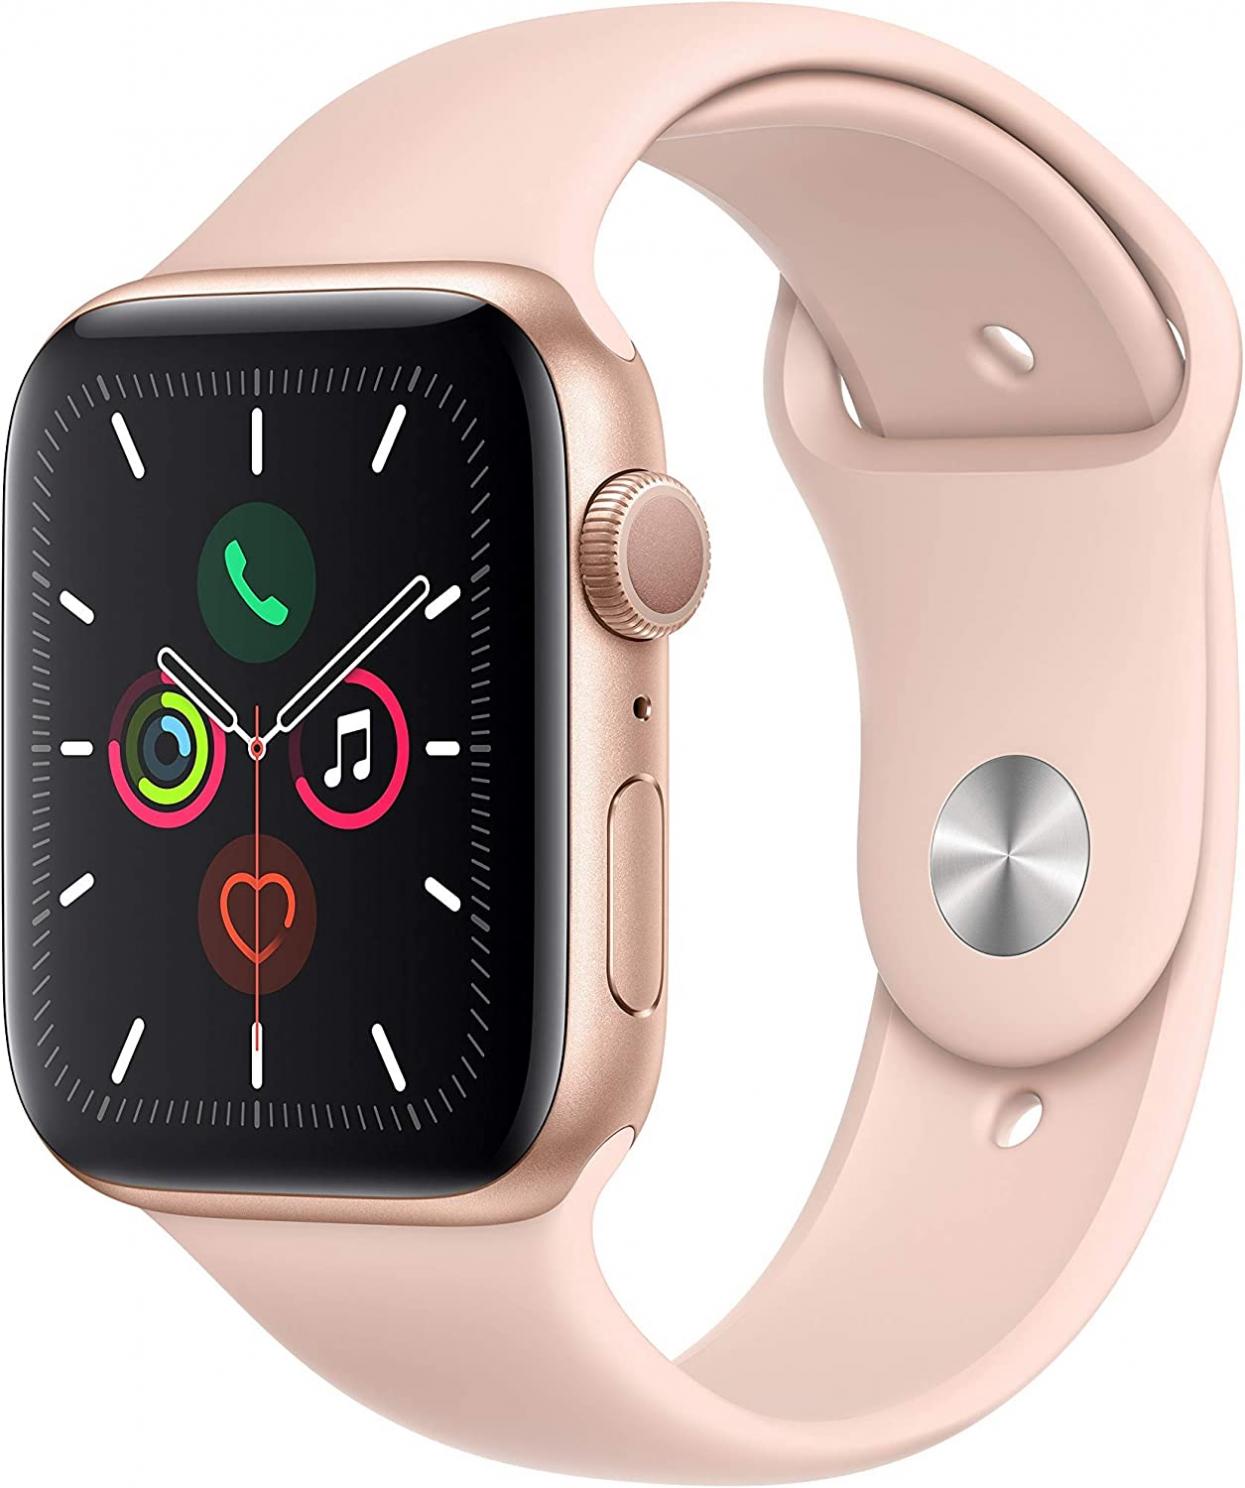 Apple Watch Series 5 (GPS, 44MM) Gold Aluminum Case with Pink Sand Sport Band (Renewed)